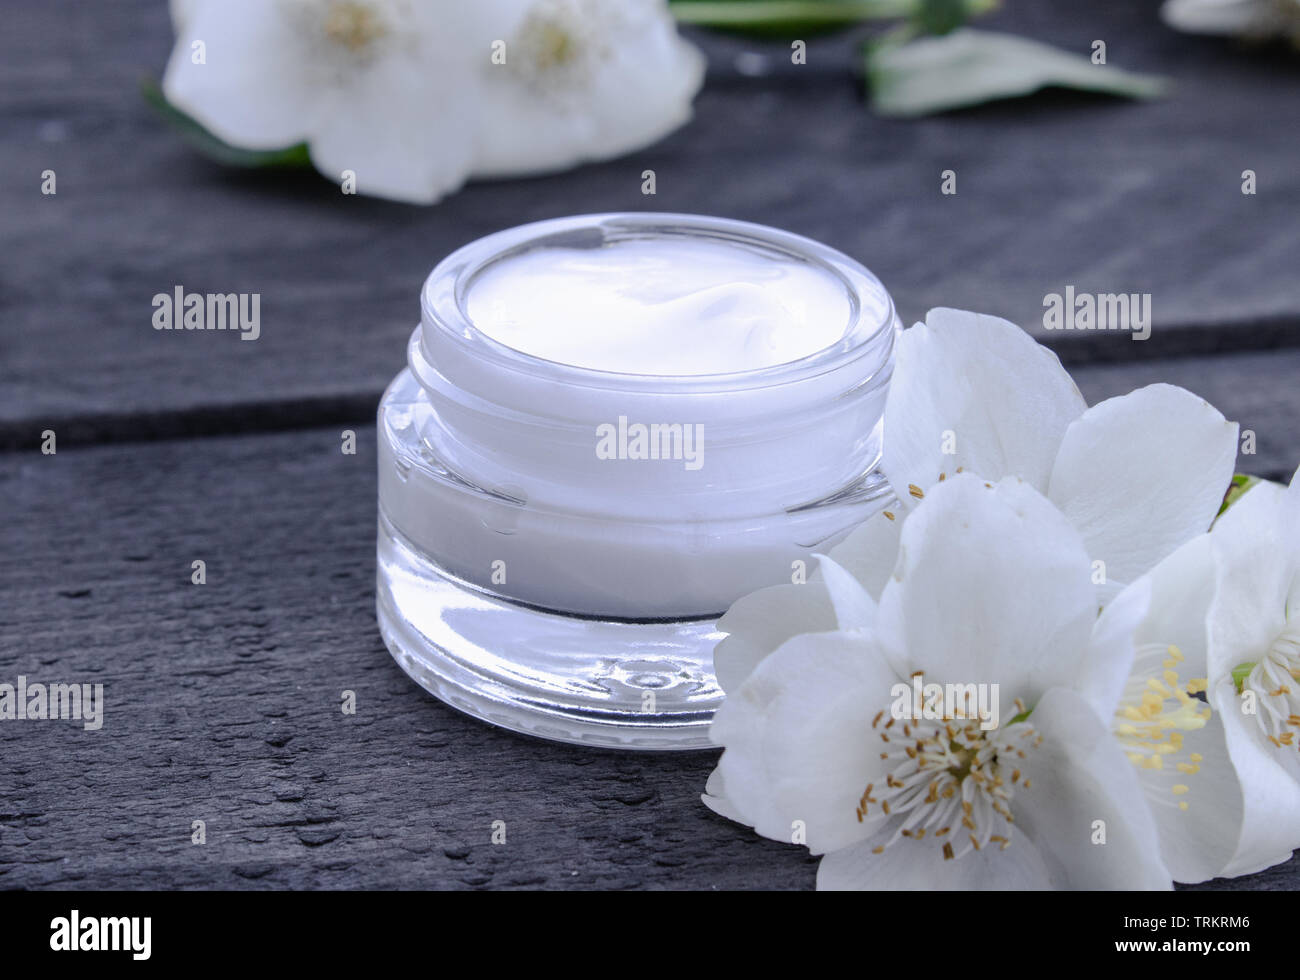 Cosmetic cream in a glass jar with jasmine flowers on a wooden background. Moisturizing face cream. Stock Photo